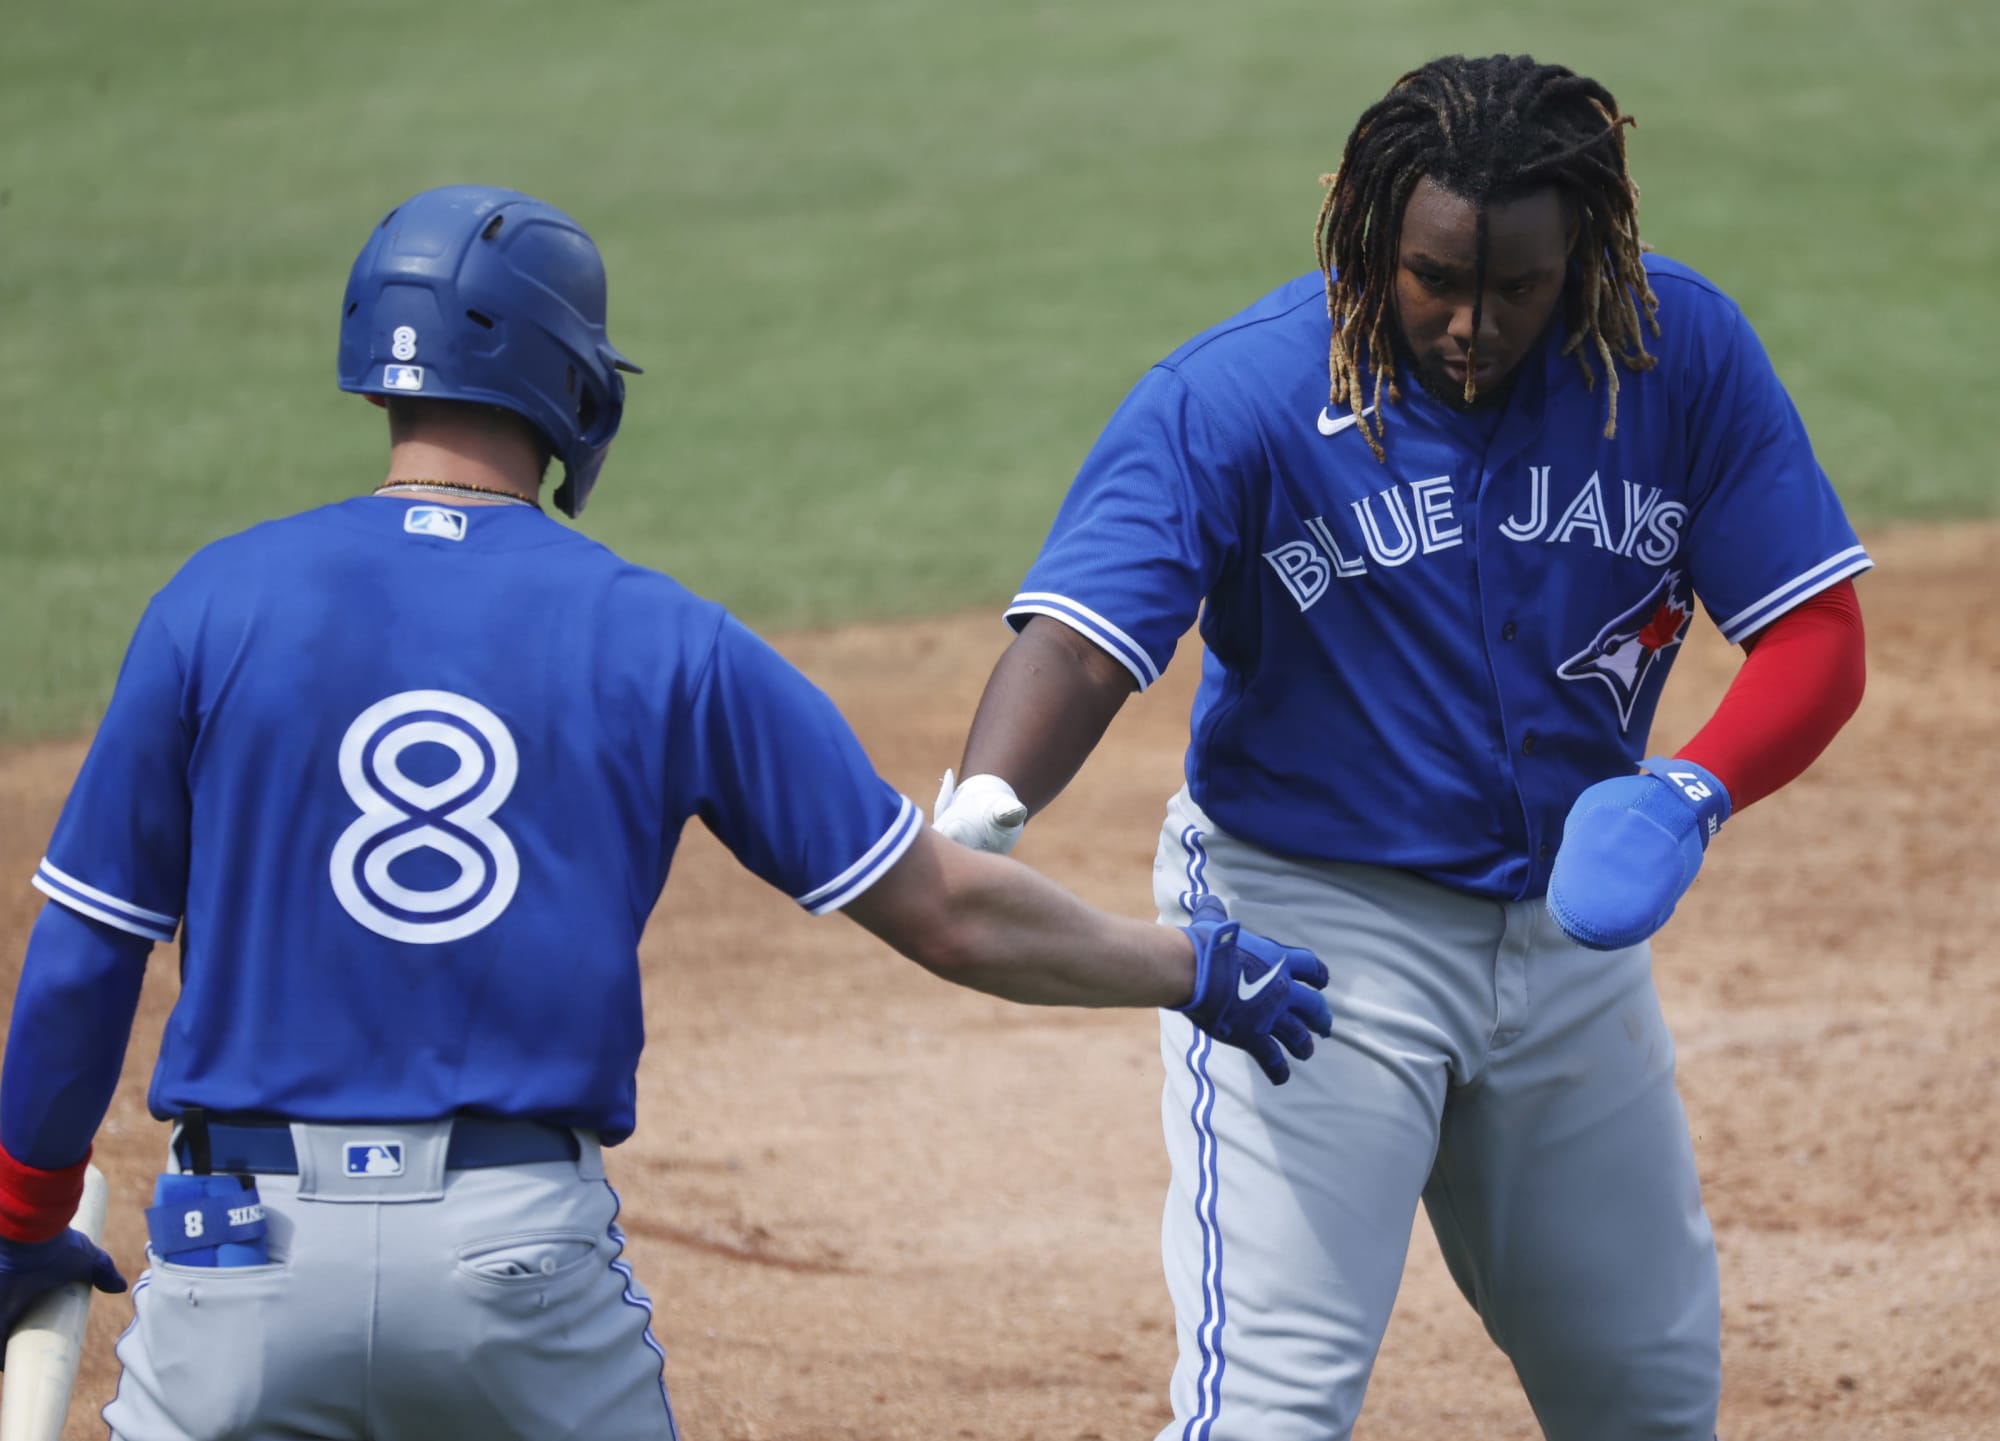 Takeaways and analysis of the Toronto Blue Jays first spring training game